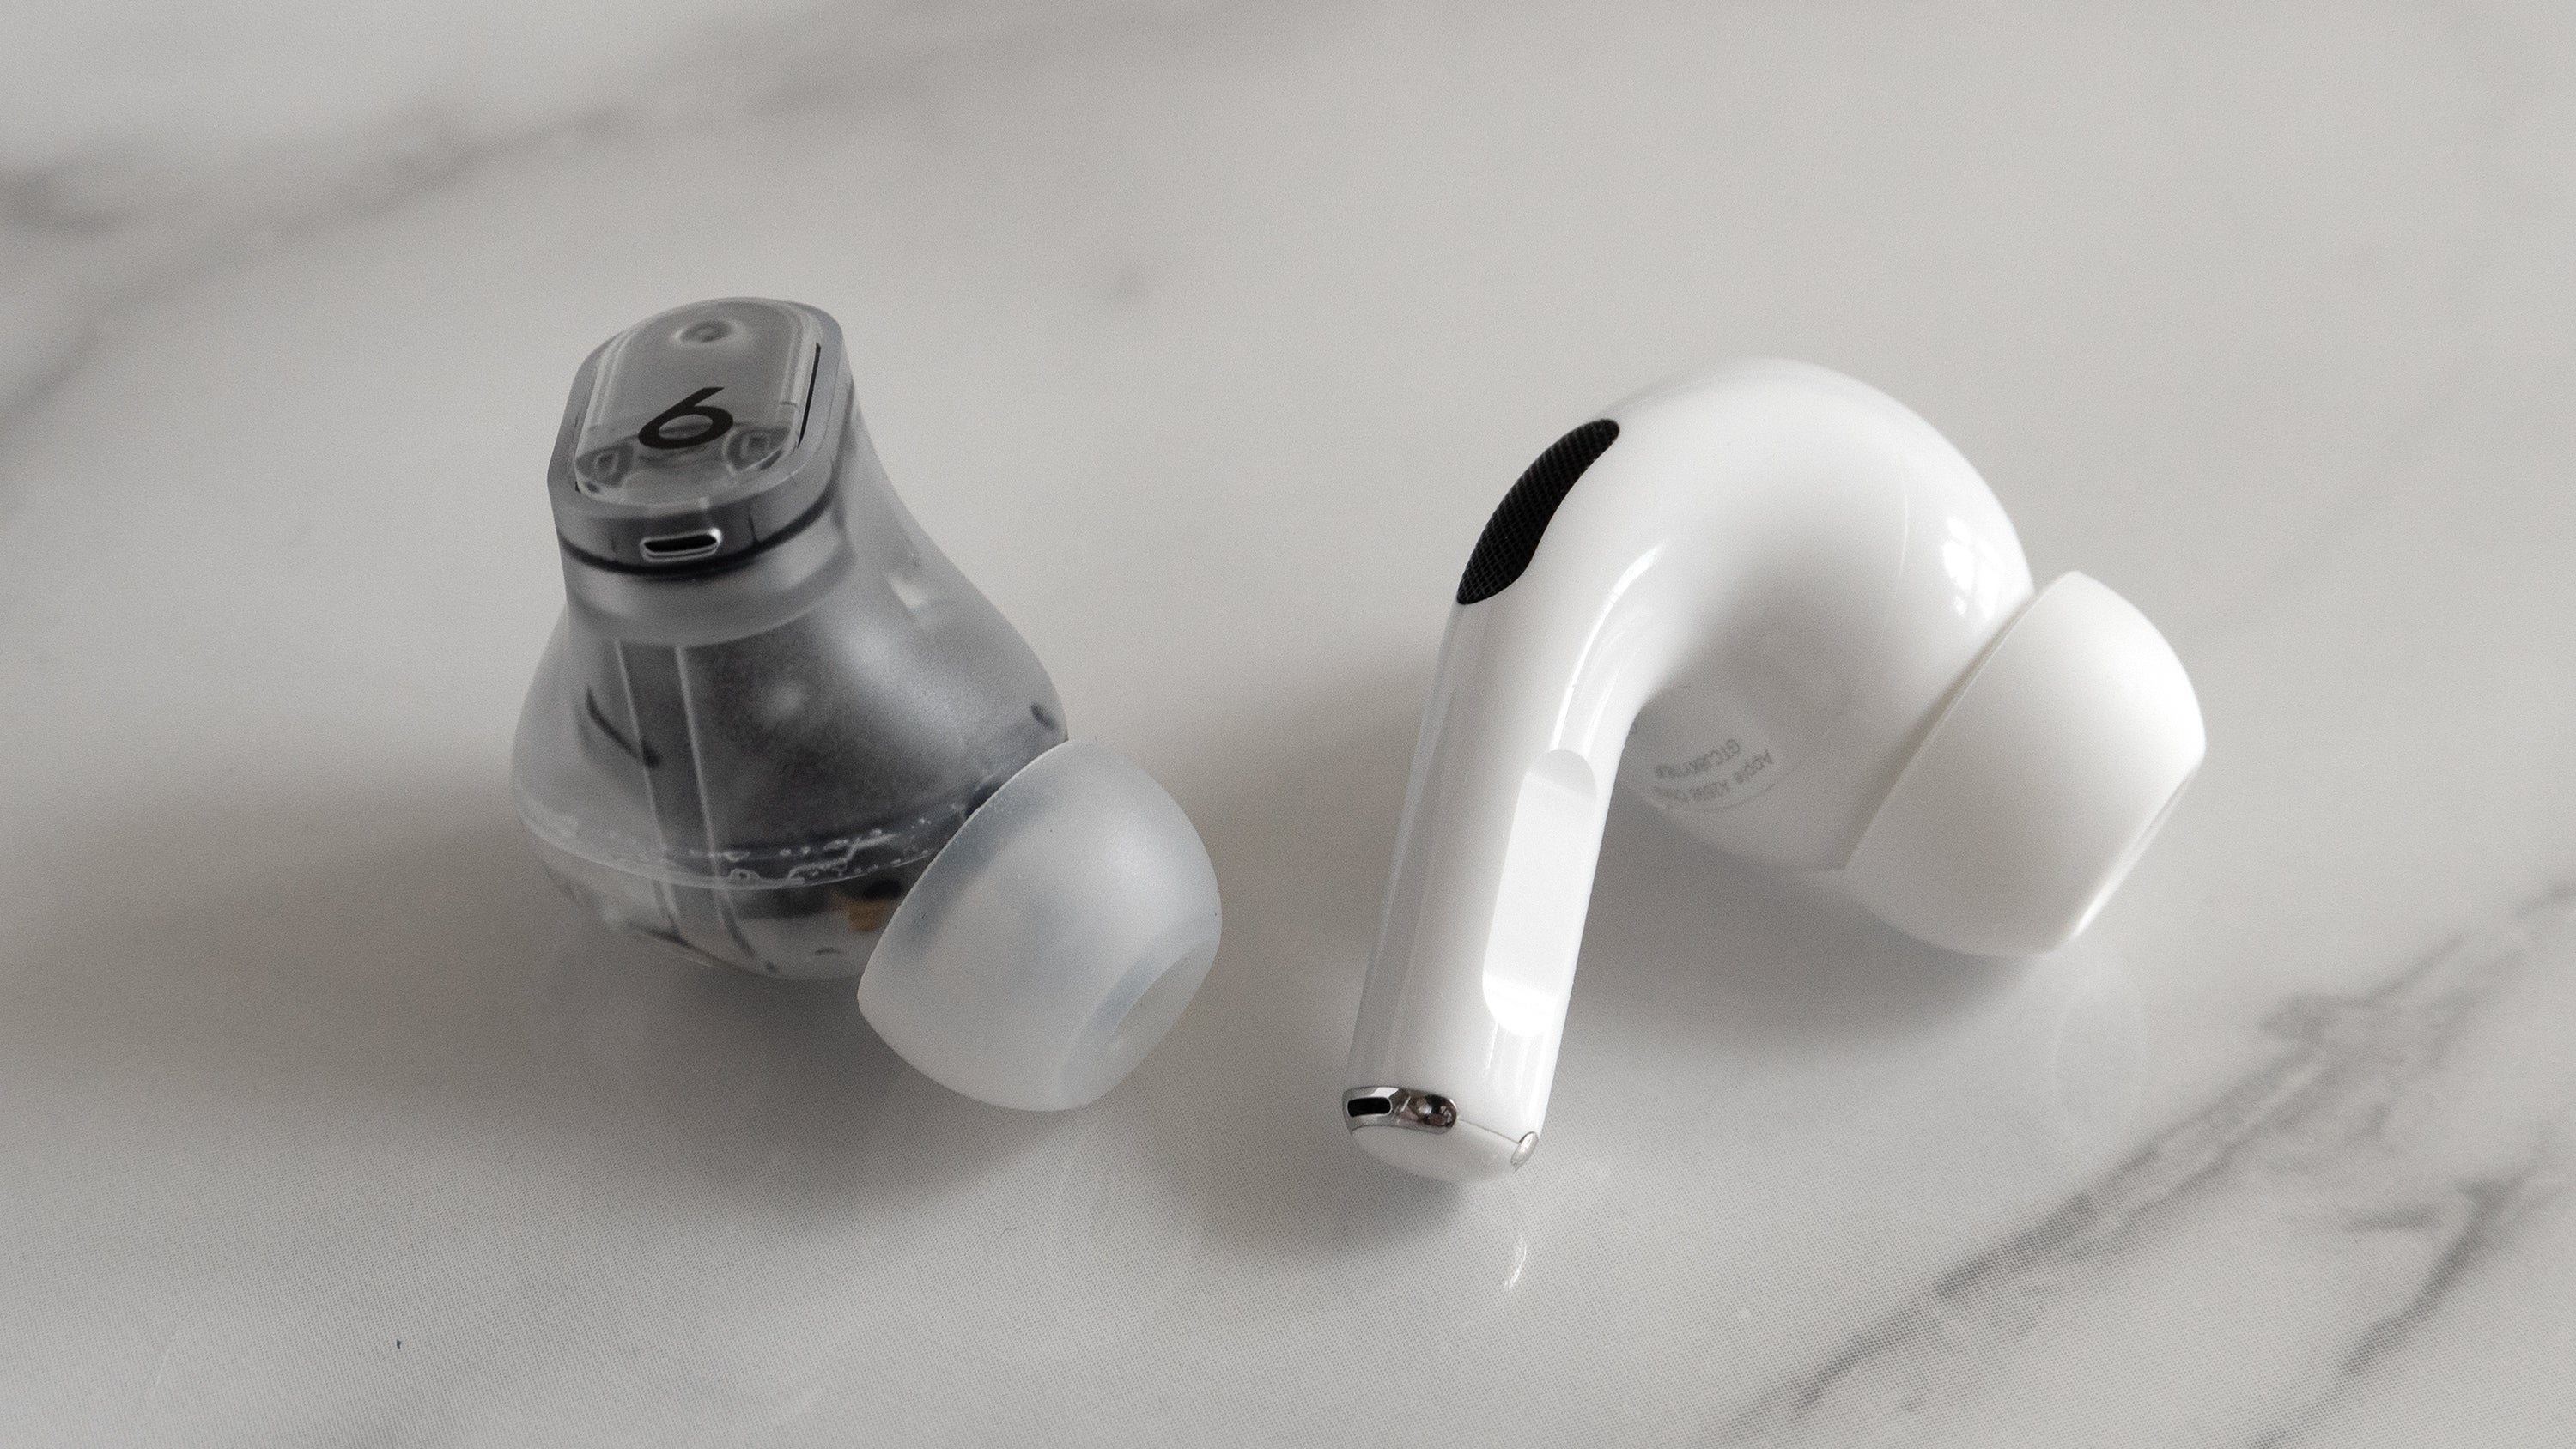 The Beats Studio Buds + (left) feature a more traditional in-ear earbud design, compared to the Apple AirPods Pro 2 (right) which house some of the electronics in a protruding stem. (Photo: Andrew Liszewski | Gizmodo)